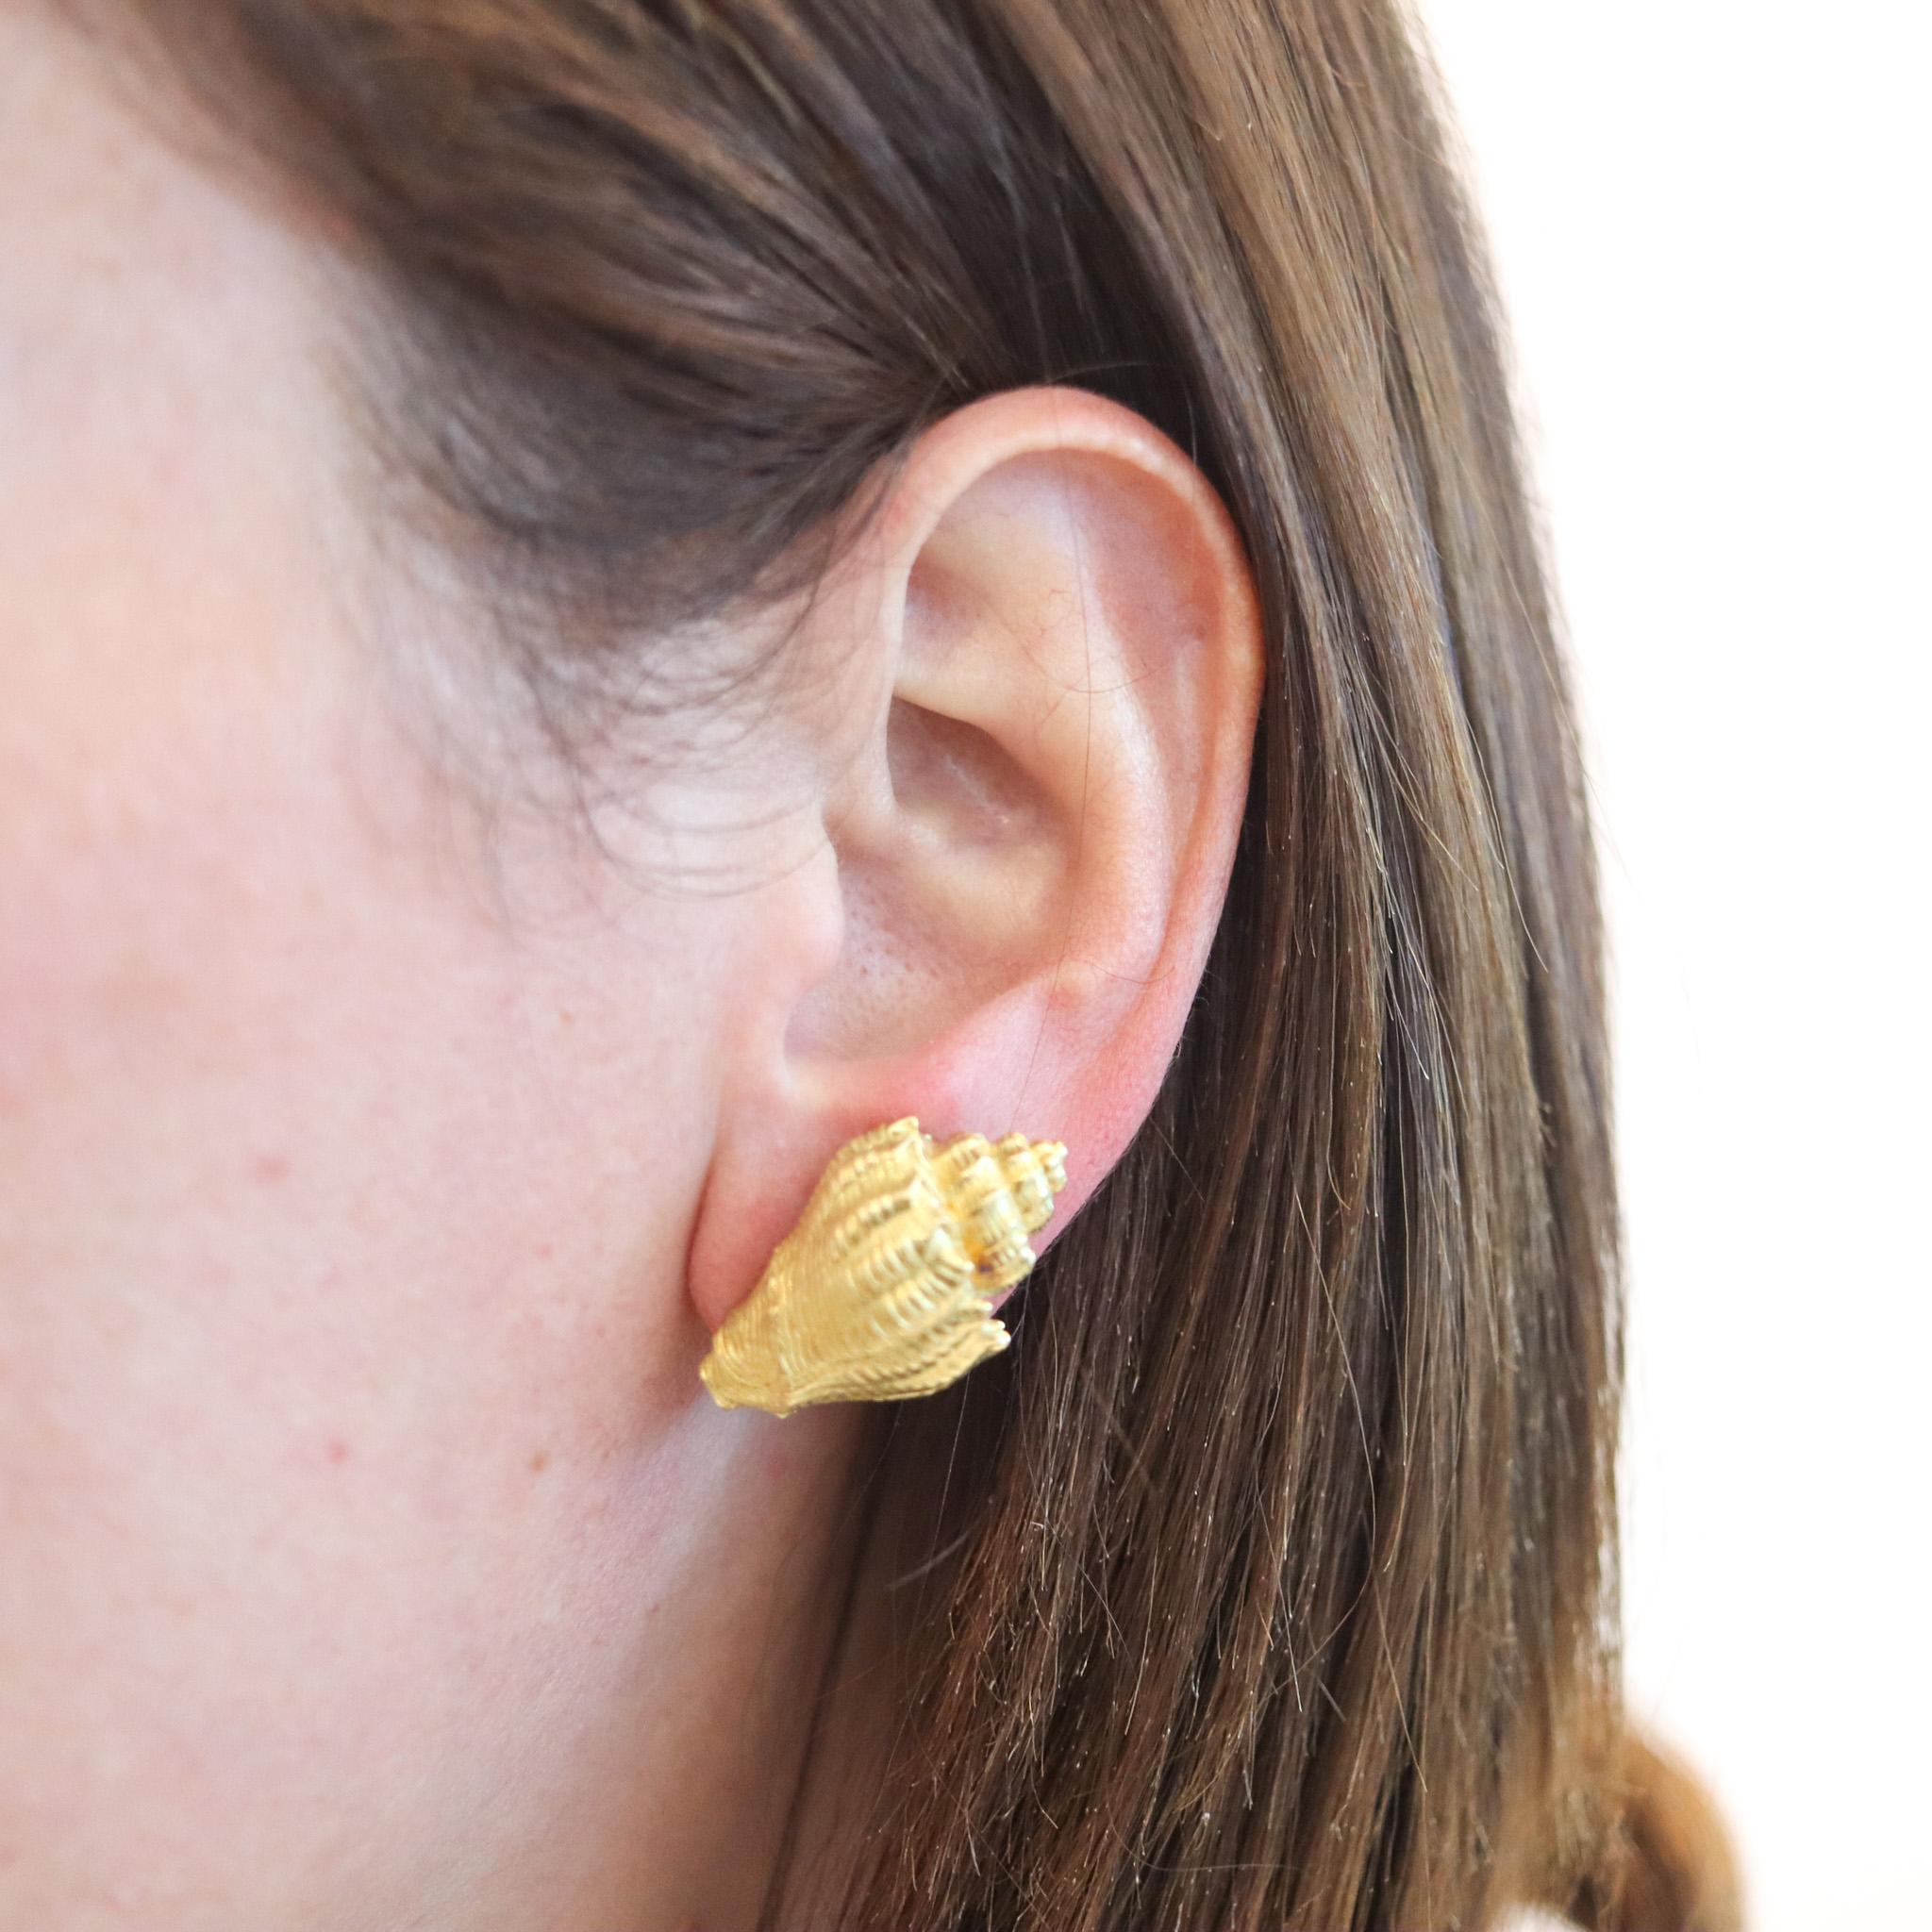 Shells earrings designed by Tiffany & Co.

A beautiful pair of clips-on earrings created in New York city at the Tiffany & Co. by George Schuler, back in the 1970. These earrings have been crafted in the shape of seashells in solid yellow gold of 18